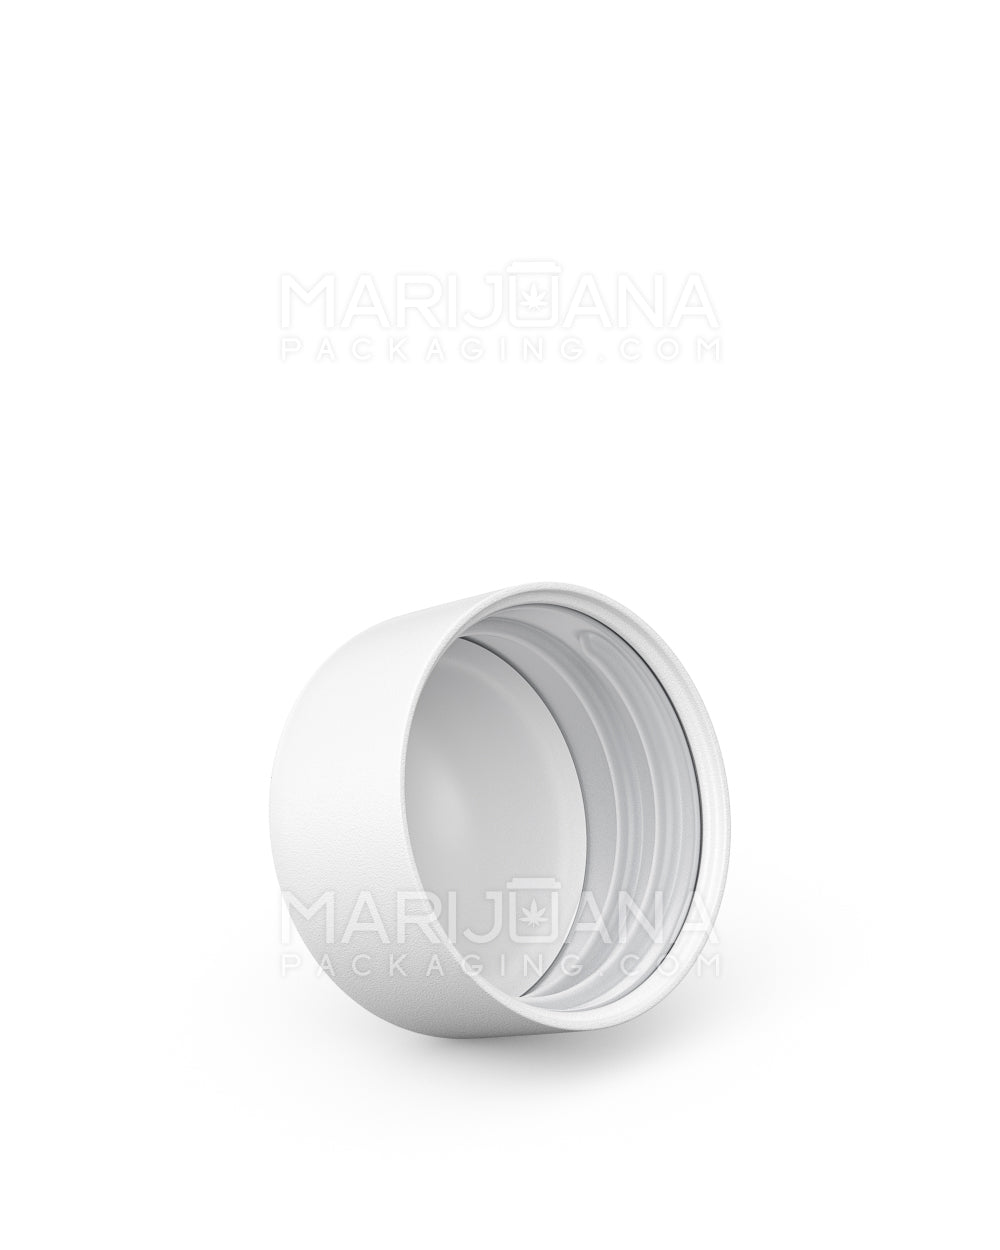 Child Resistant | Smooth Push Down & Turn Plastic Caps w/ Foam Liner | 28mm - Matte White - 504 Count - 2